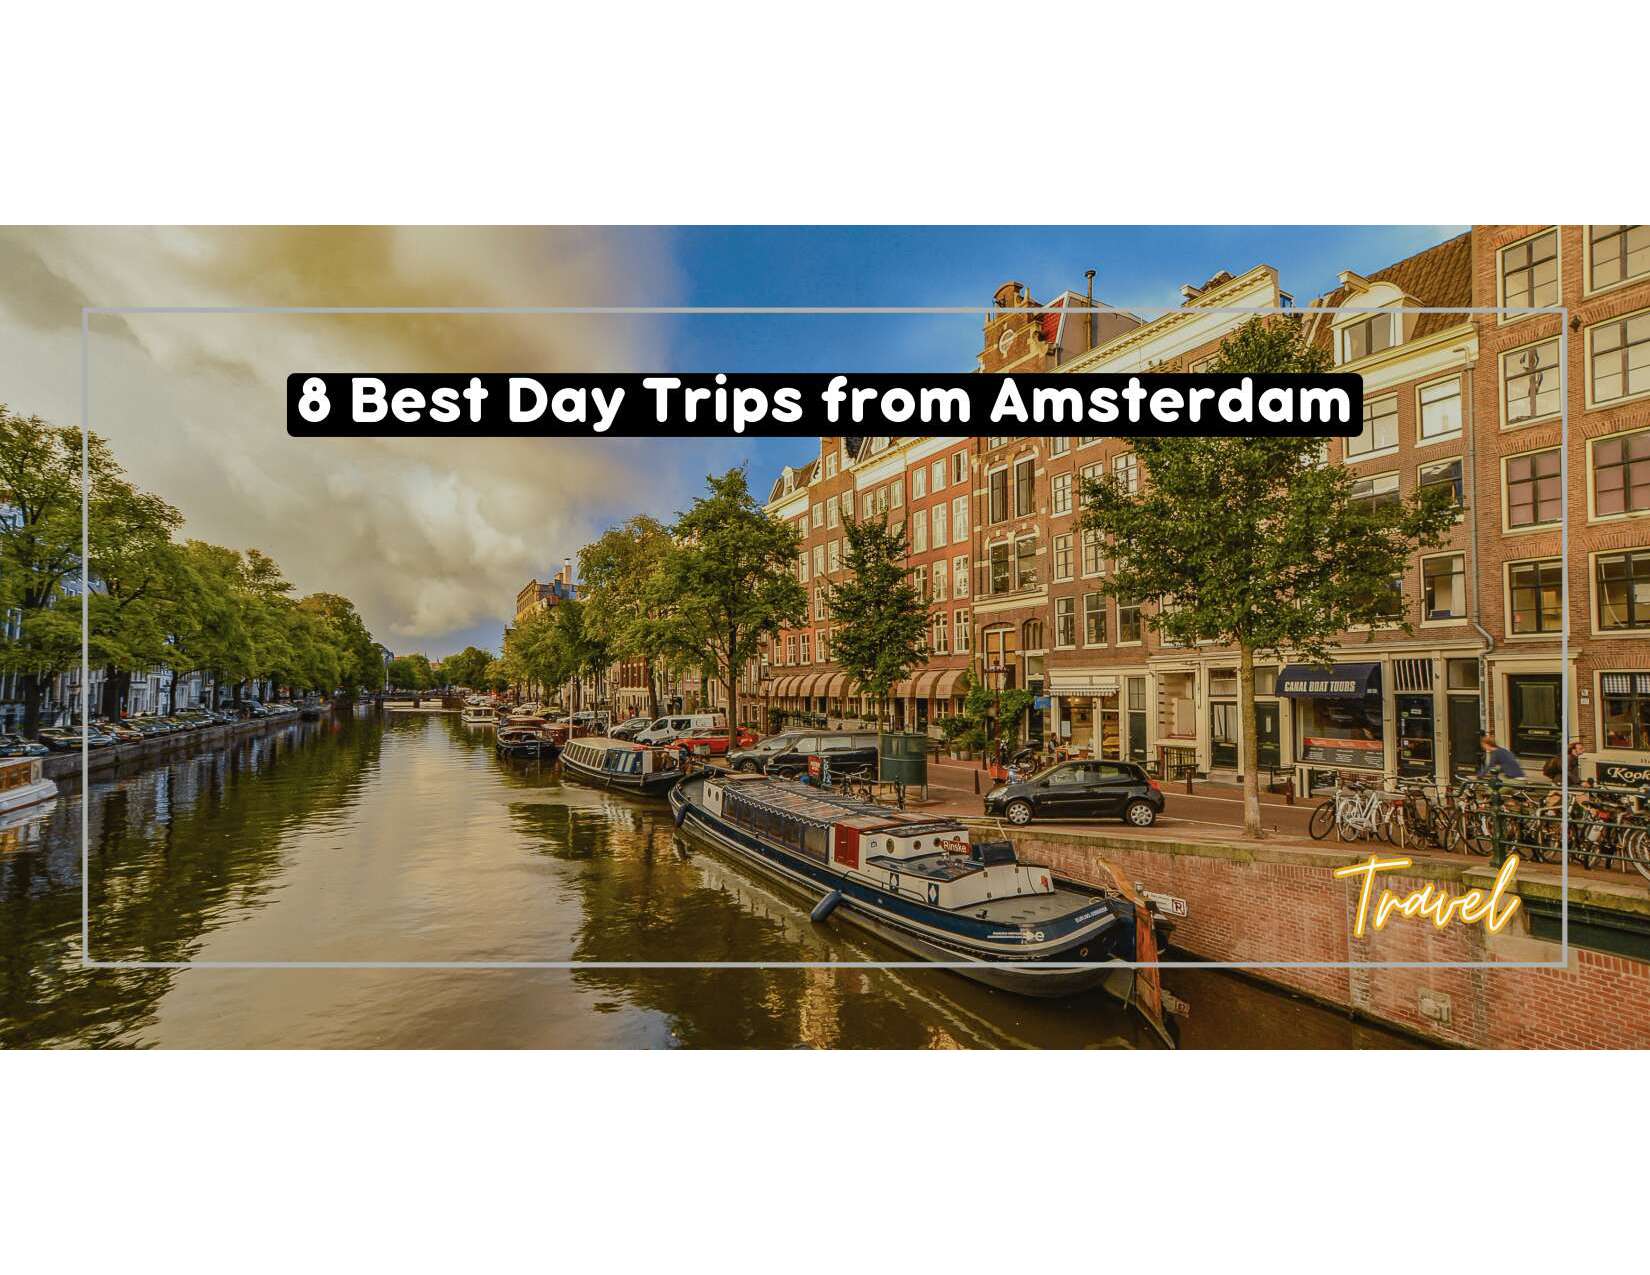 8 Best Day Trips from Amsterdam (1)